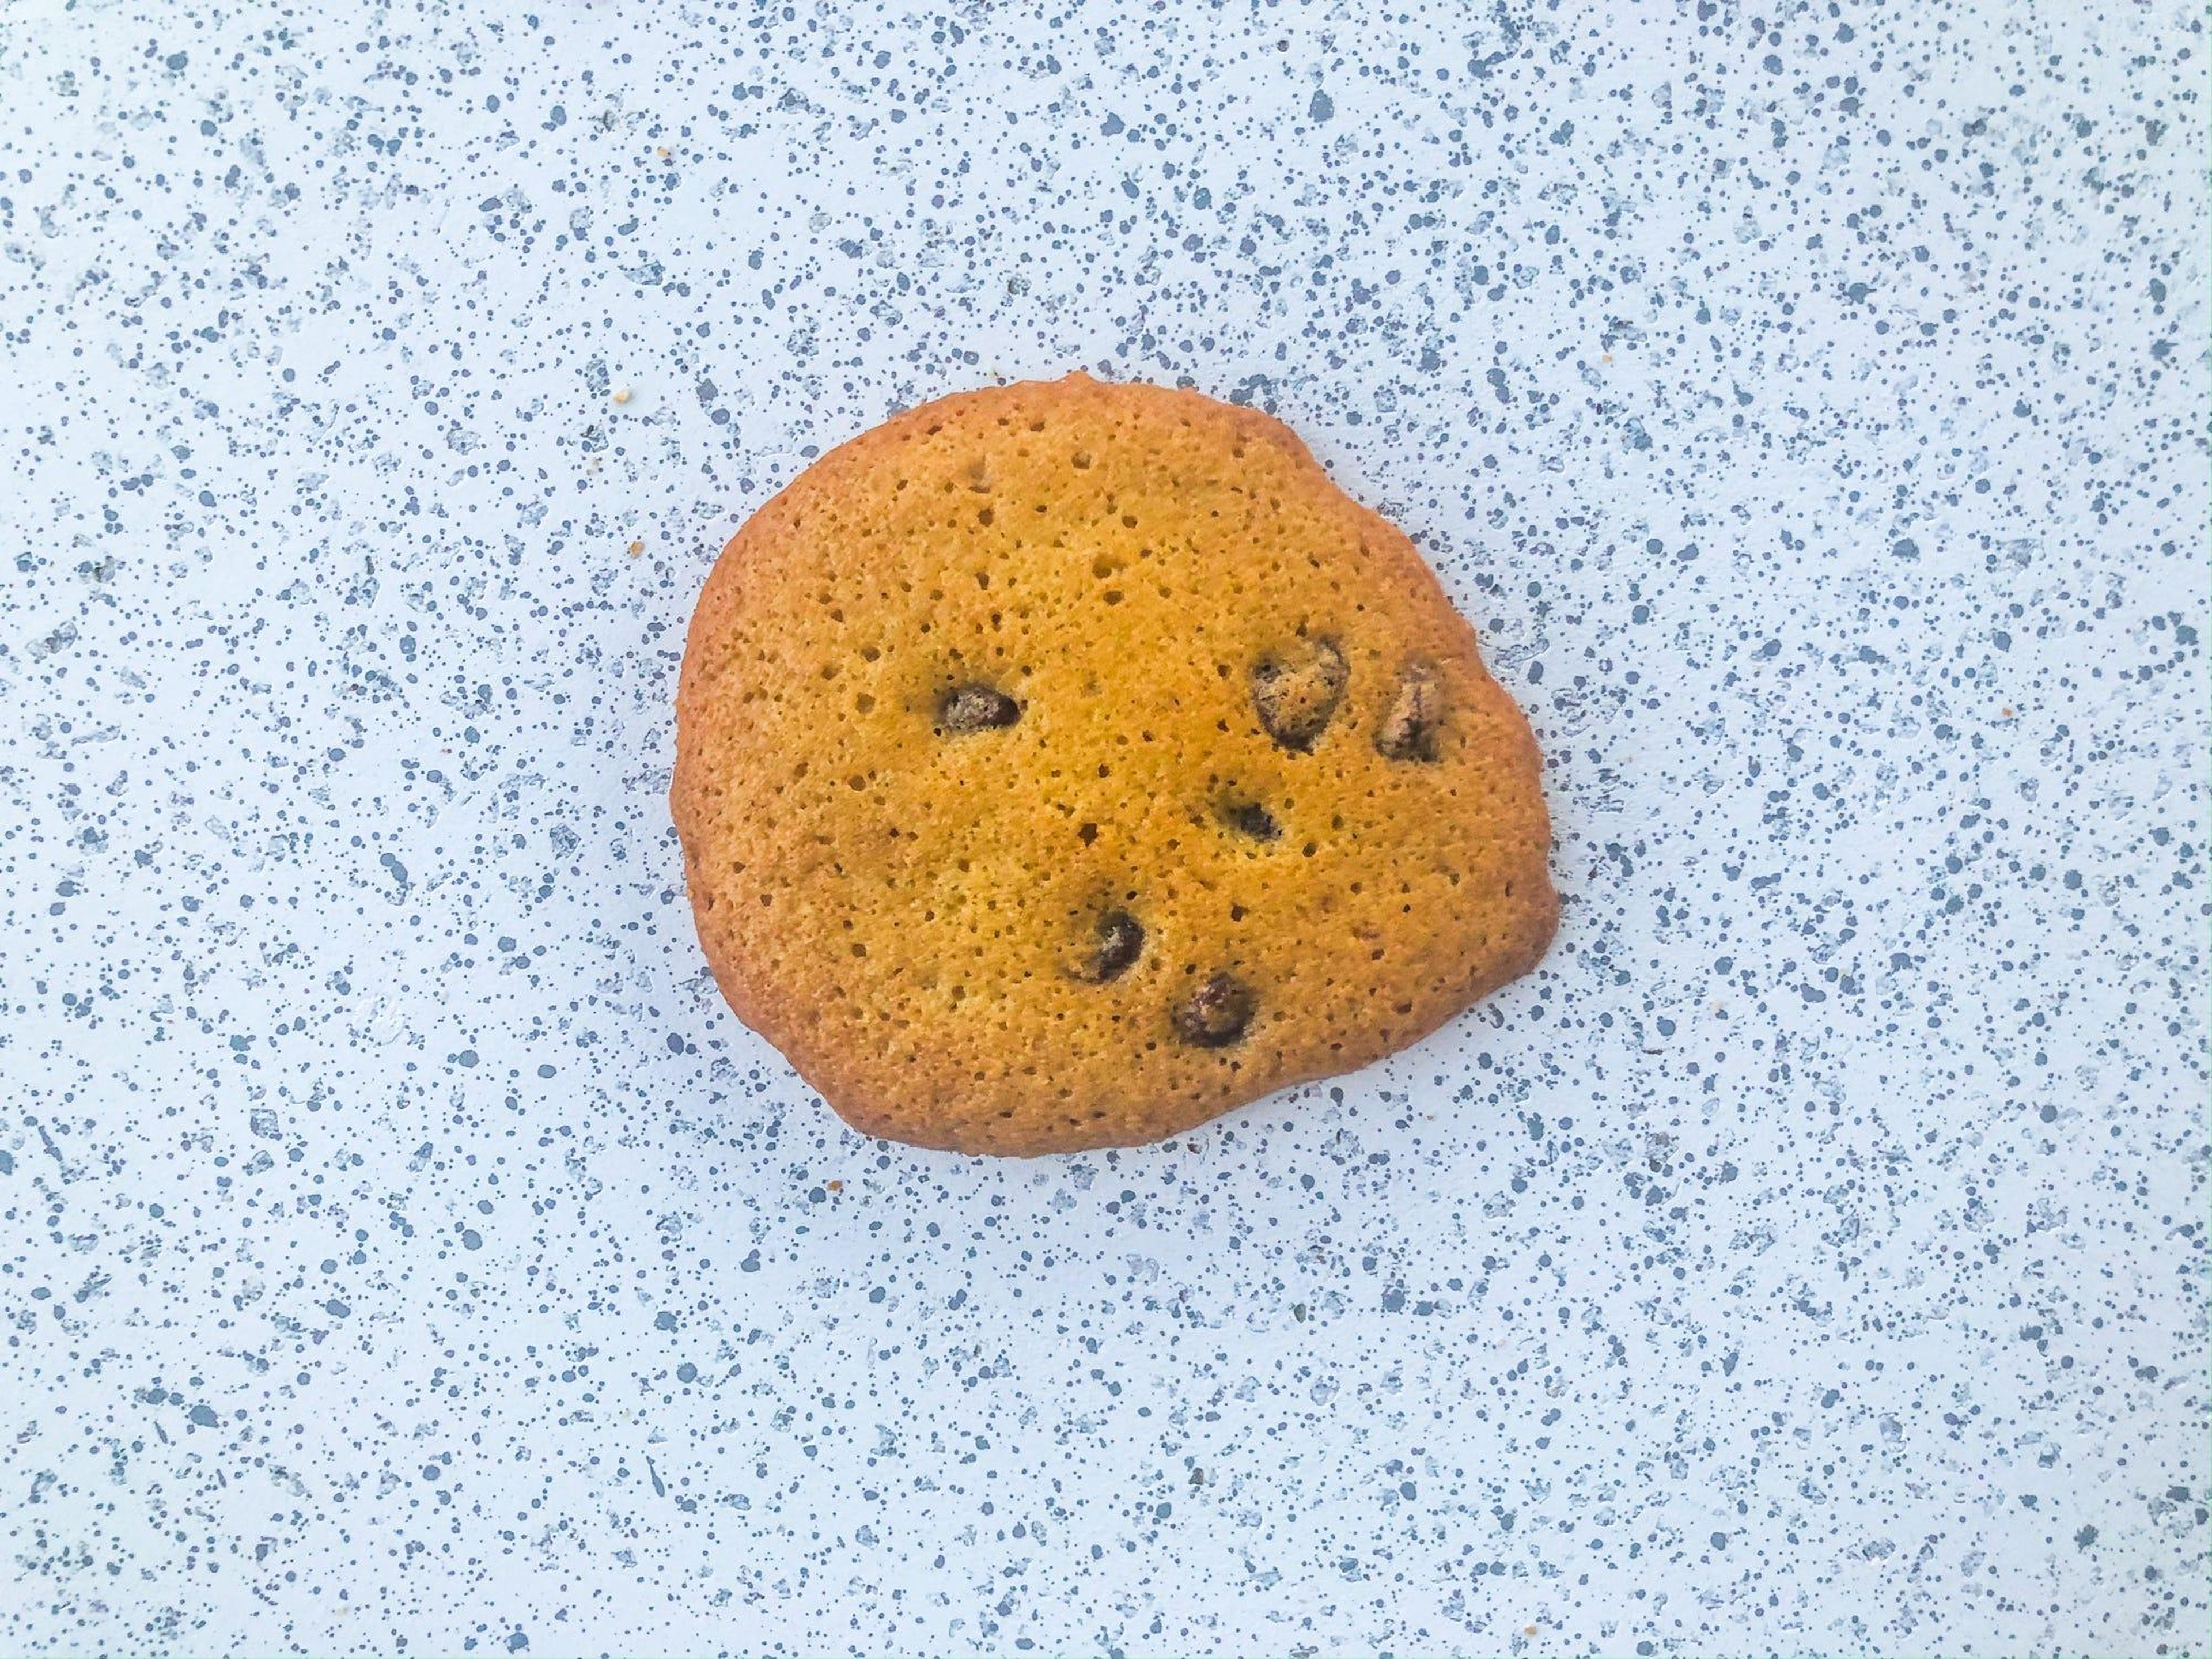 A cookie with too many eggs.